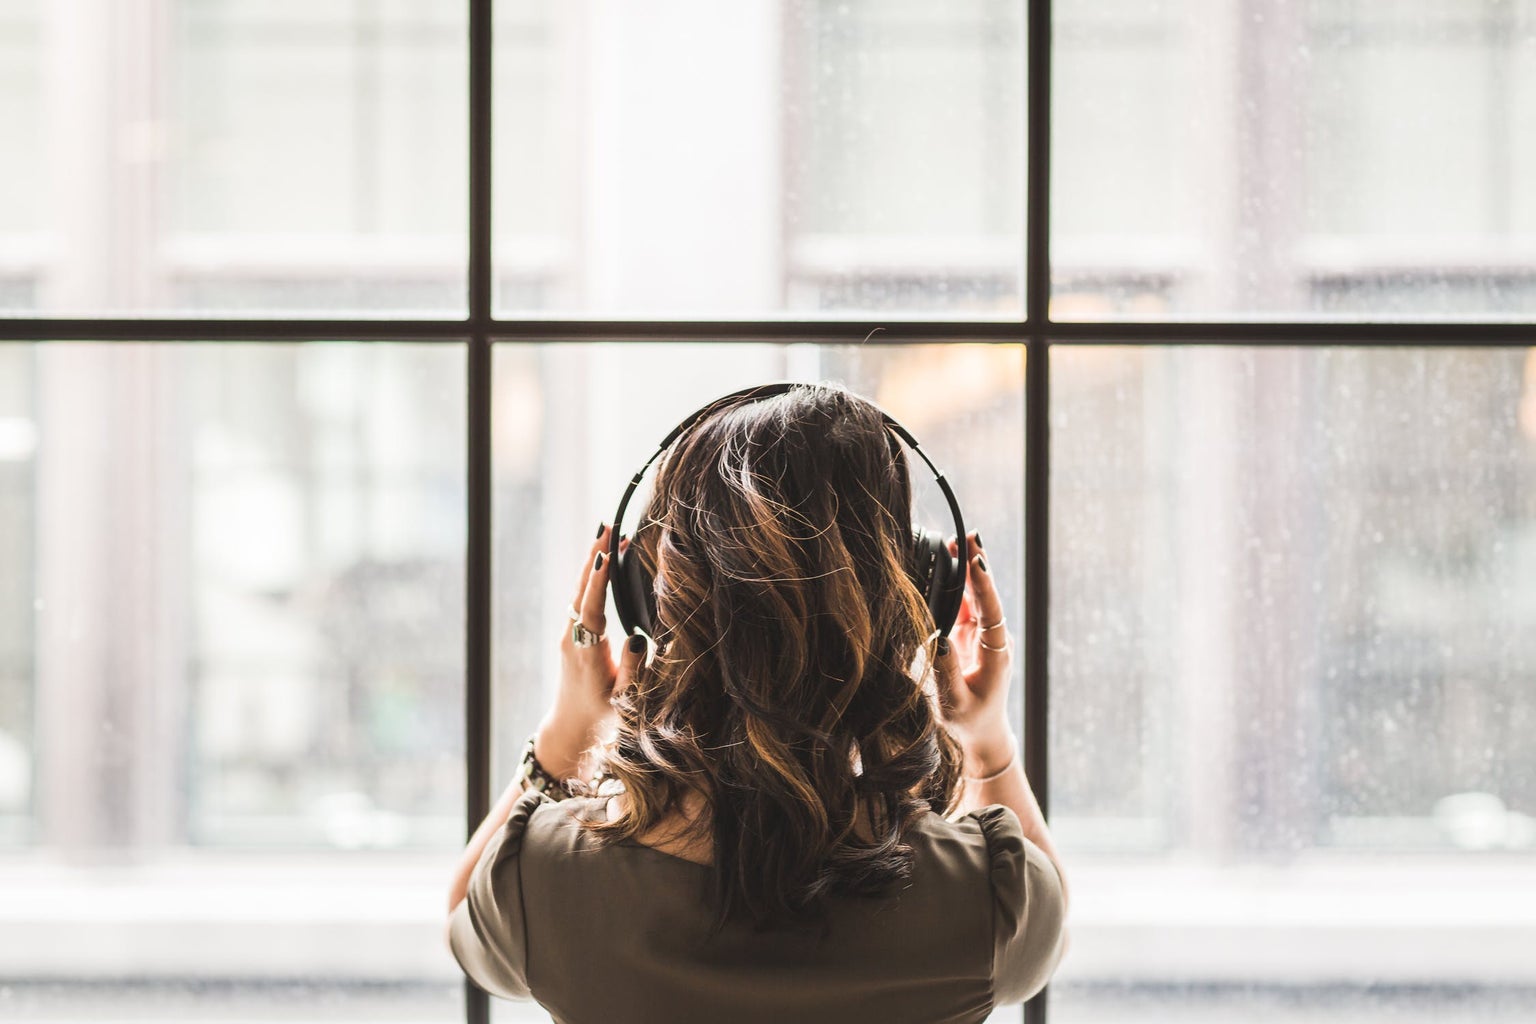 brunette woman shot from behind facing a window, wearing headphones listening to music and holding them with her hands